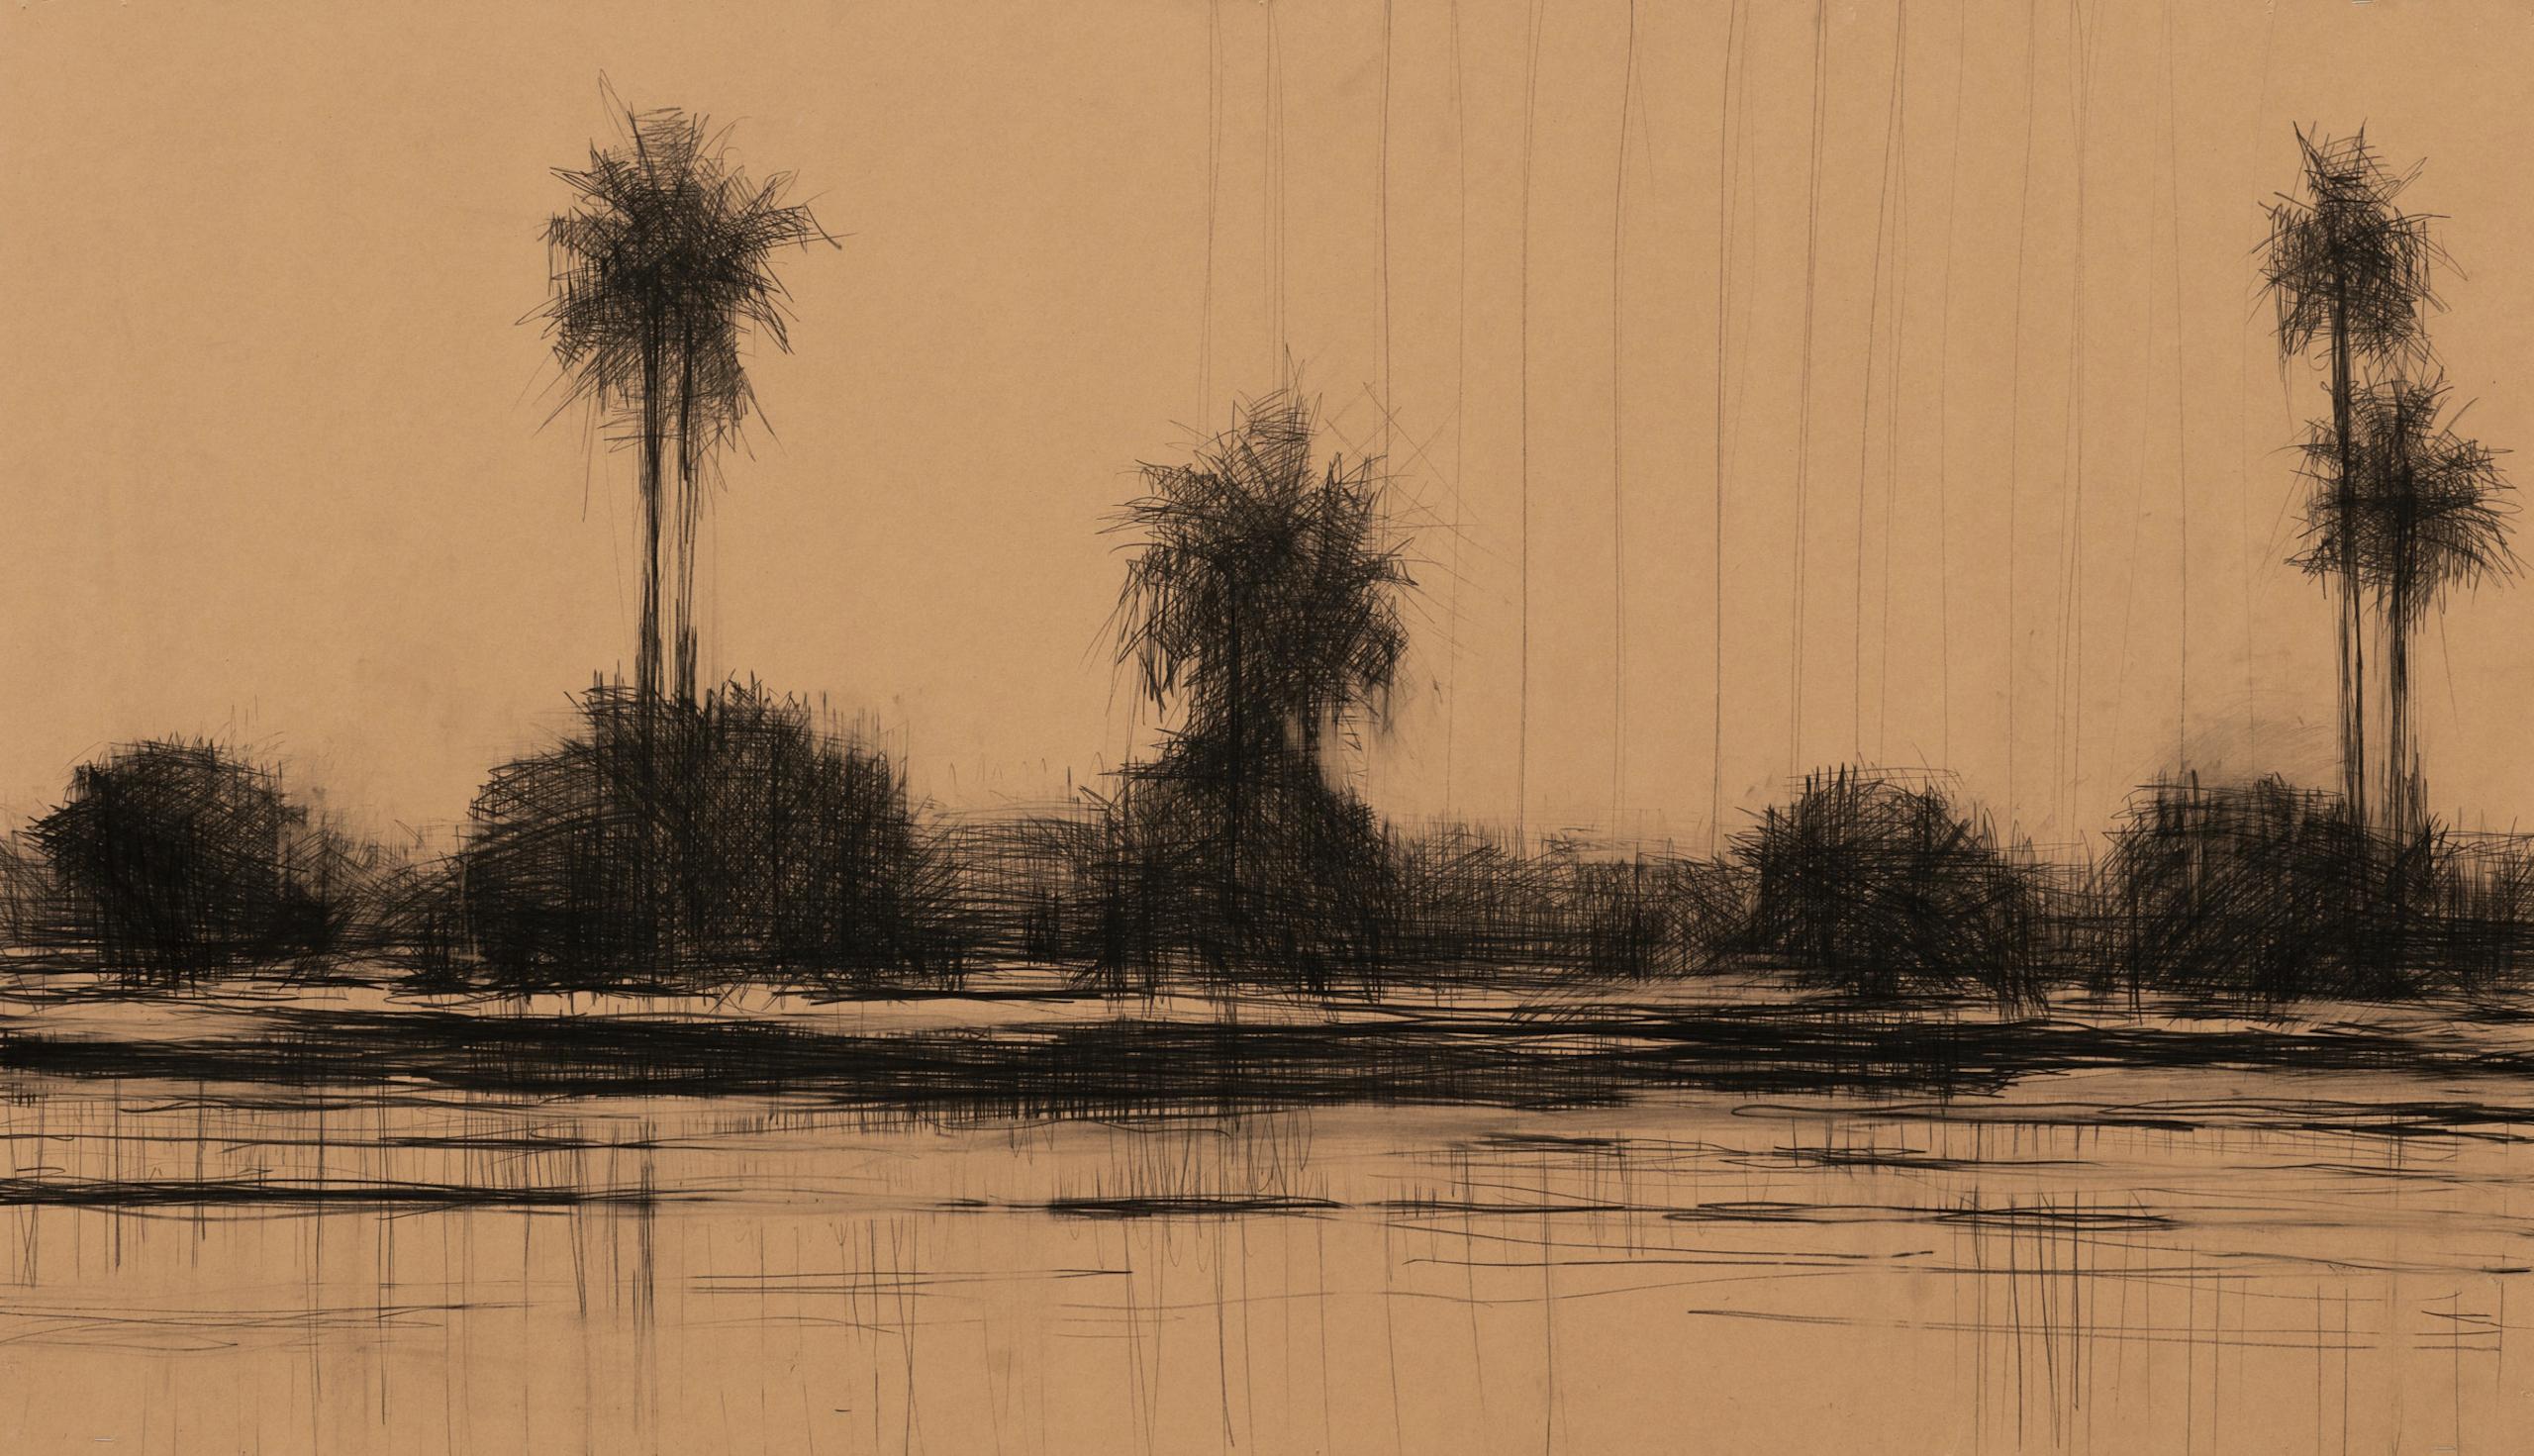 Mangroves in Casamance No.1 is a unique oil pencil on cardboard, glued on wooden frame painting by Spanish contemporary artist Calo Carratalá, dimensions are 80 × 139 × 4 cm (31.5 × 54.7 × 1.6 in). 
The artwork is signed, sold unframed (a